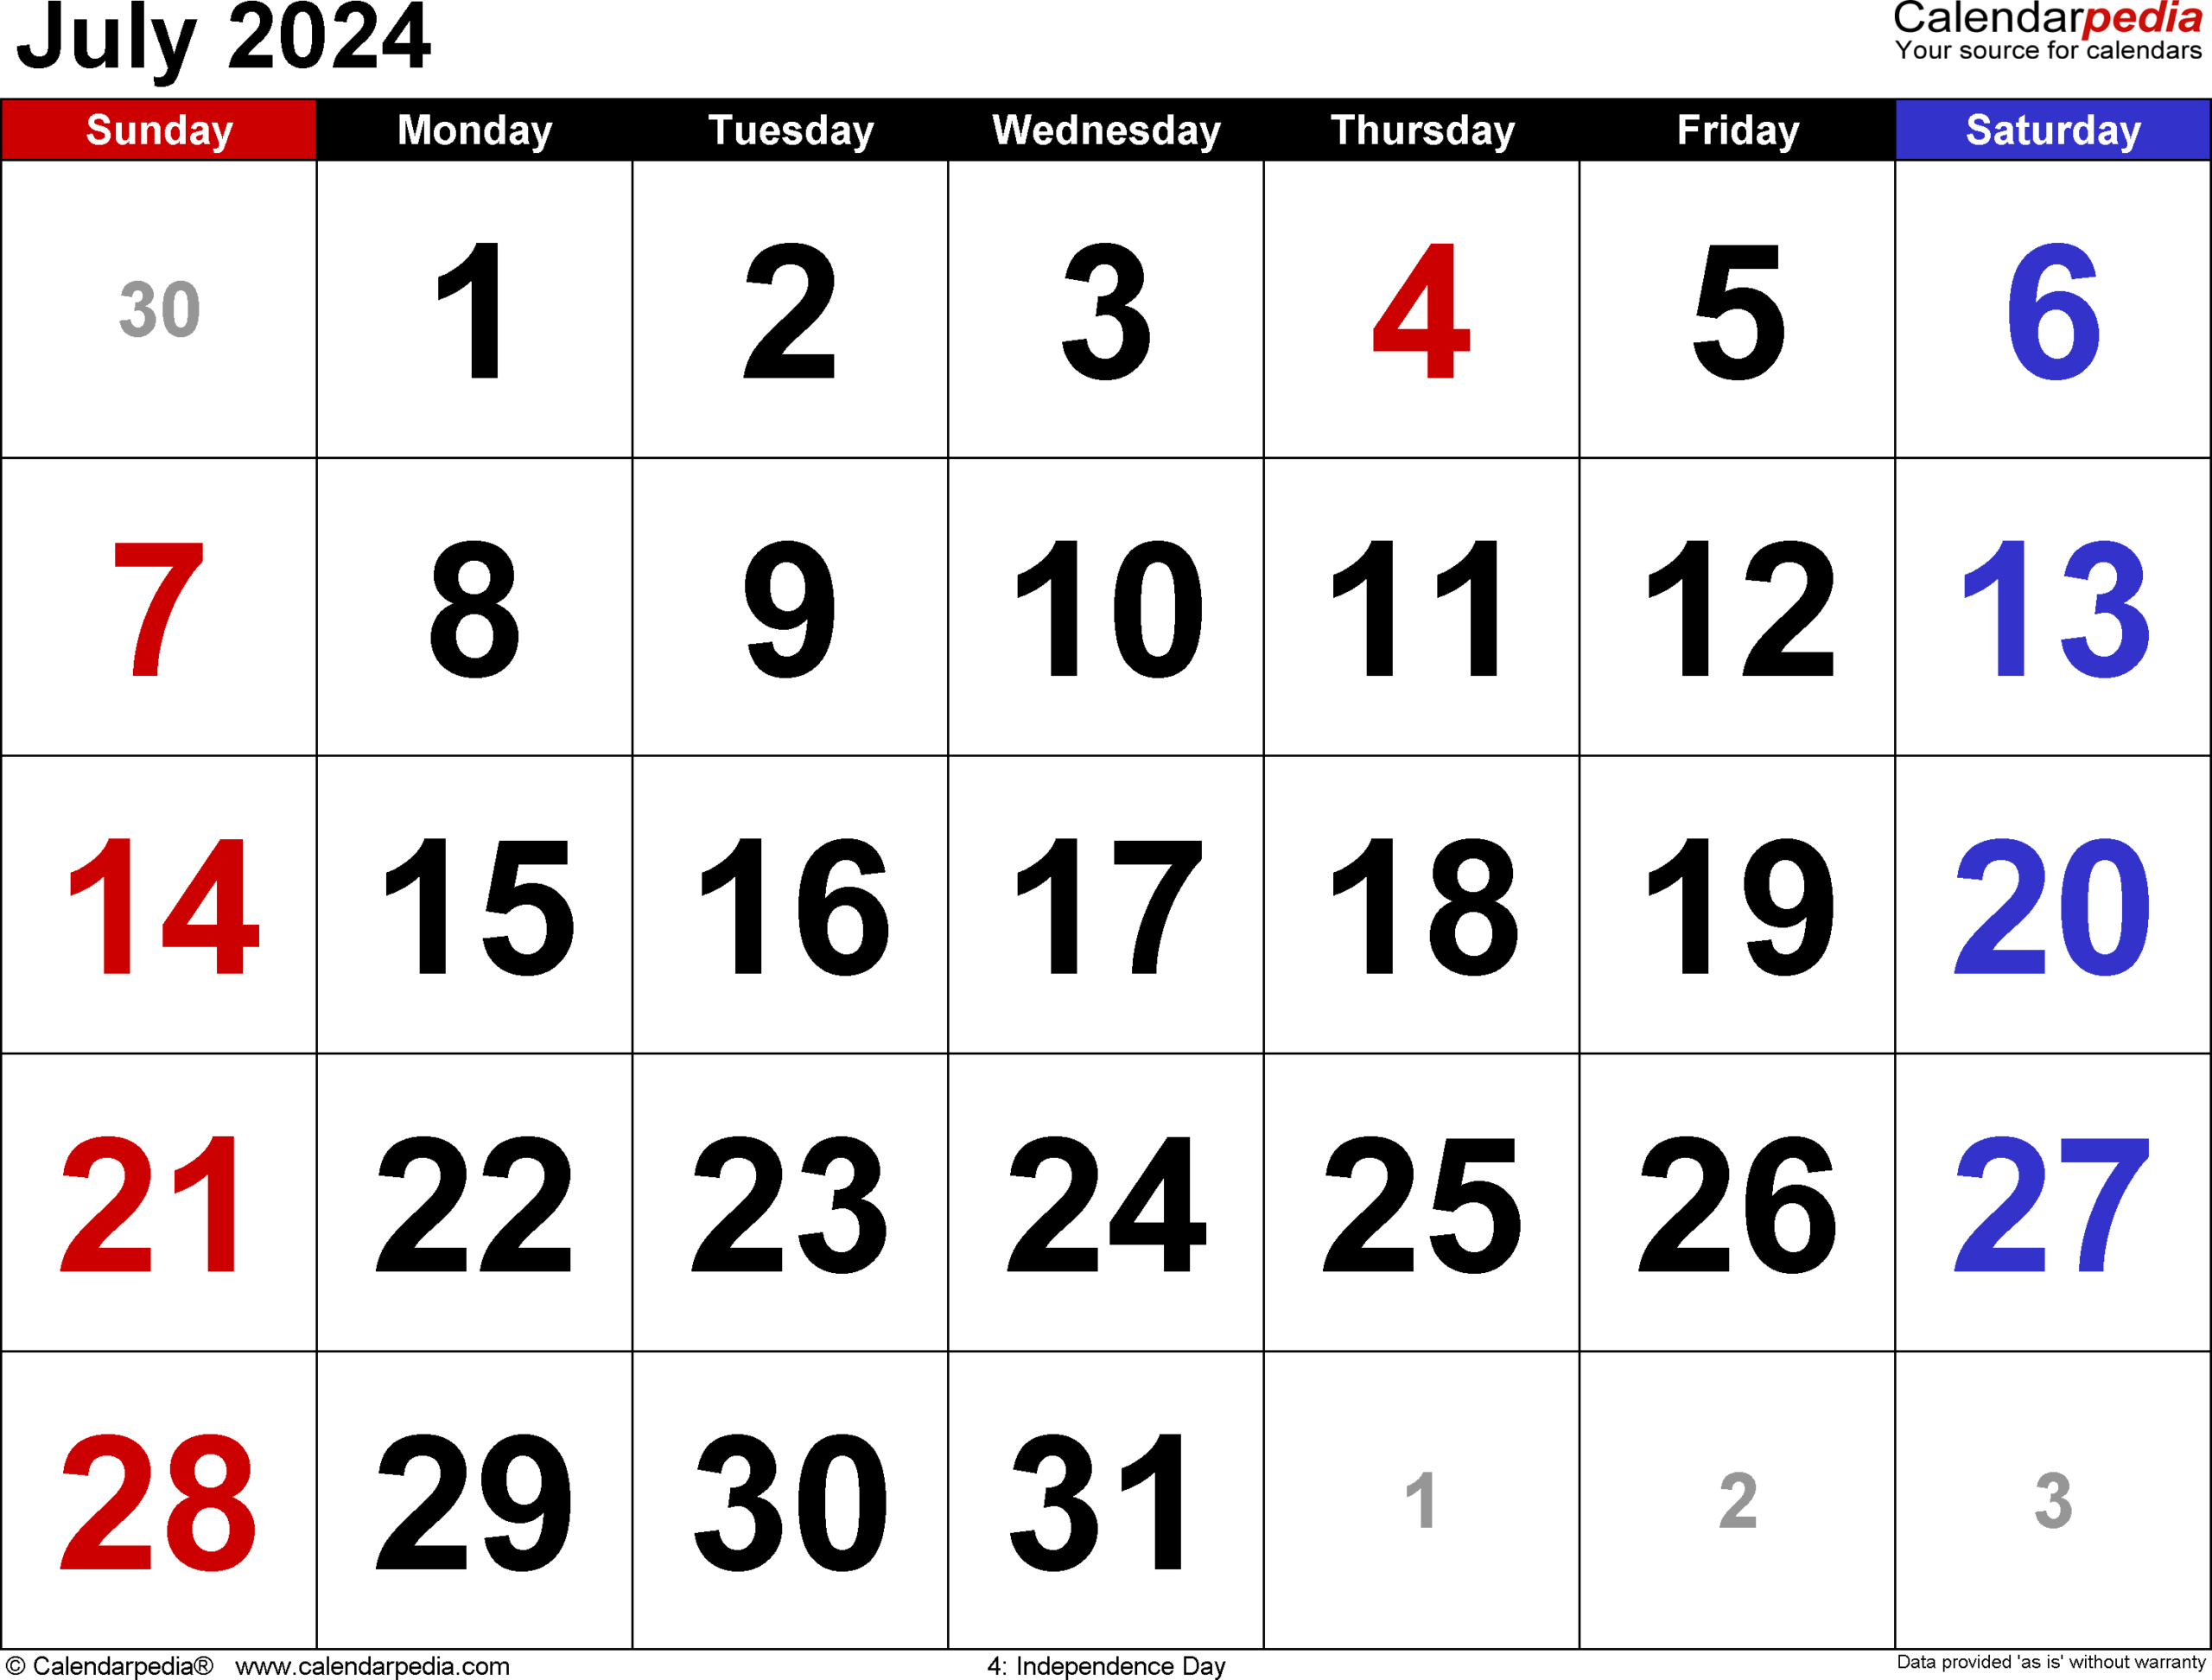 July 2024 Calendar | Templates For Word, Excel And Pdf | Calendar 2024